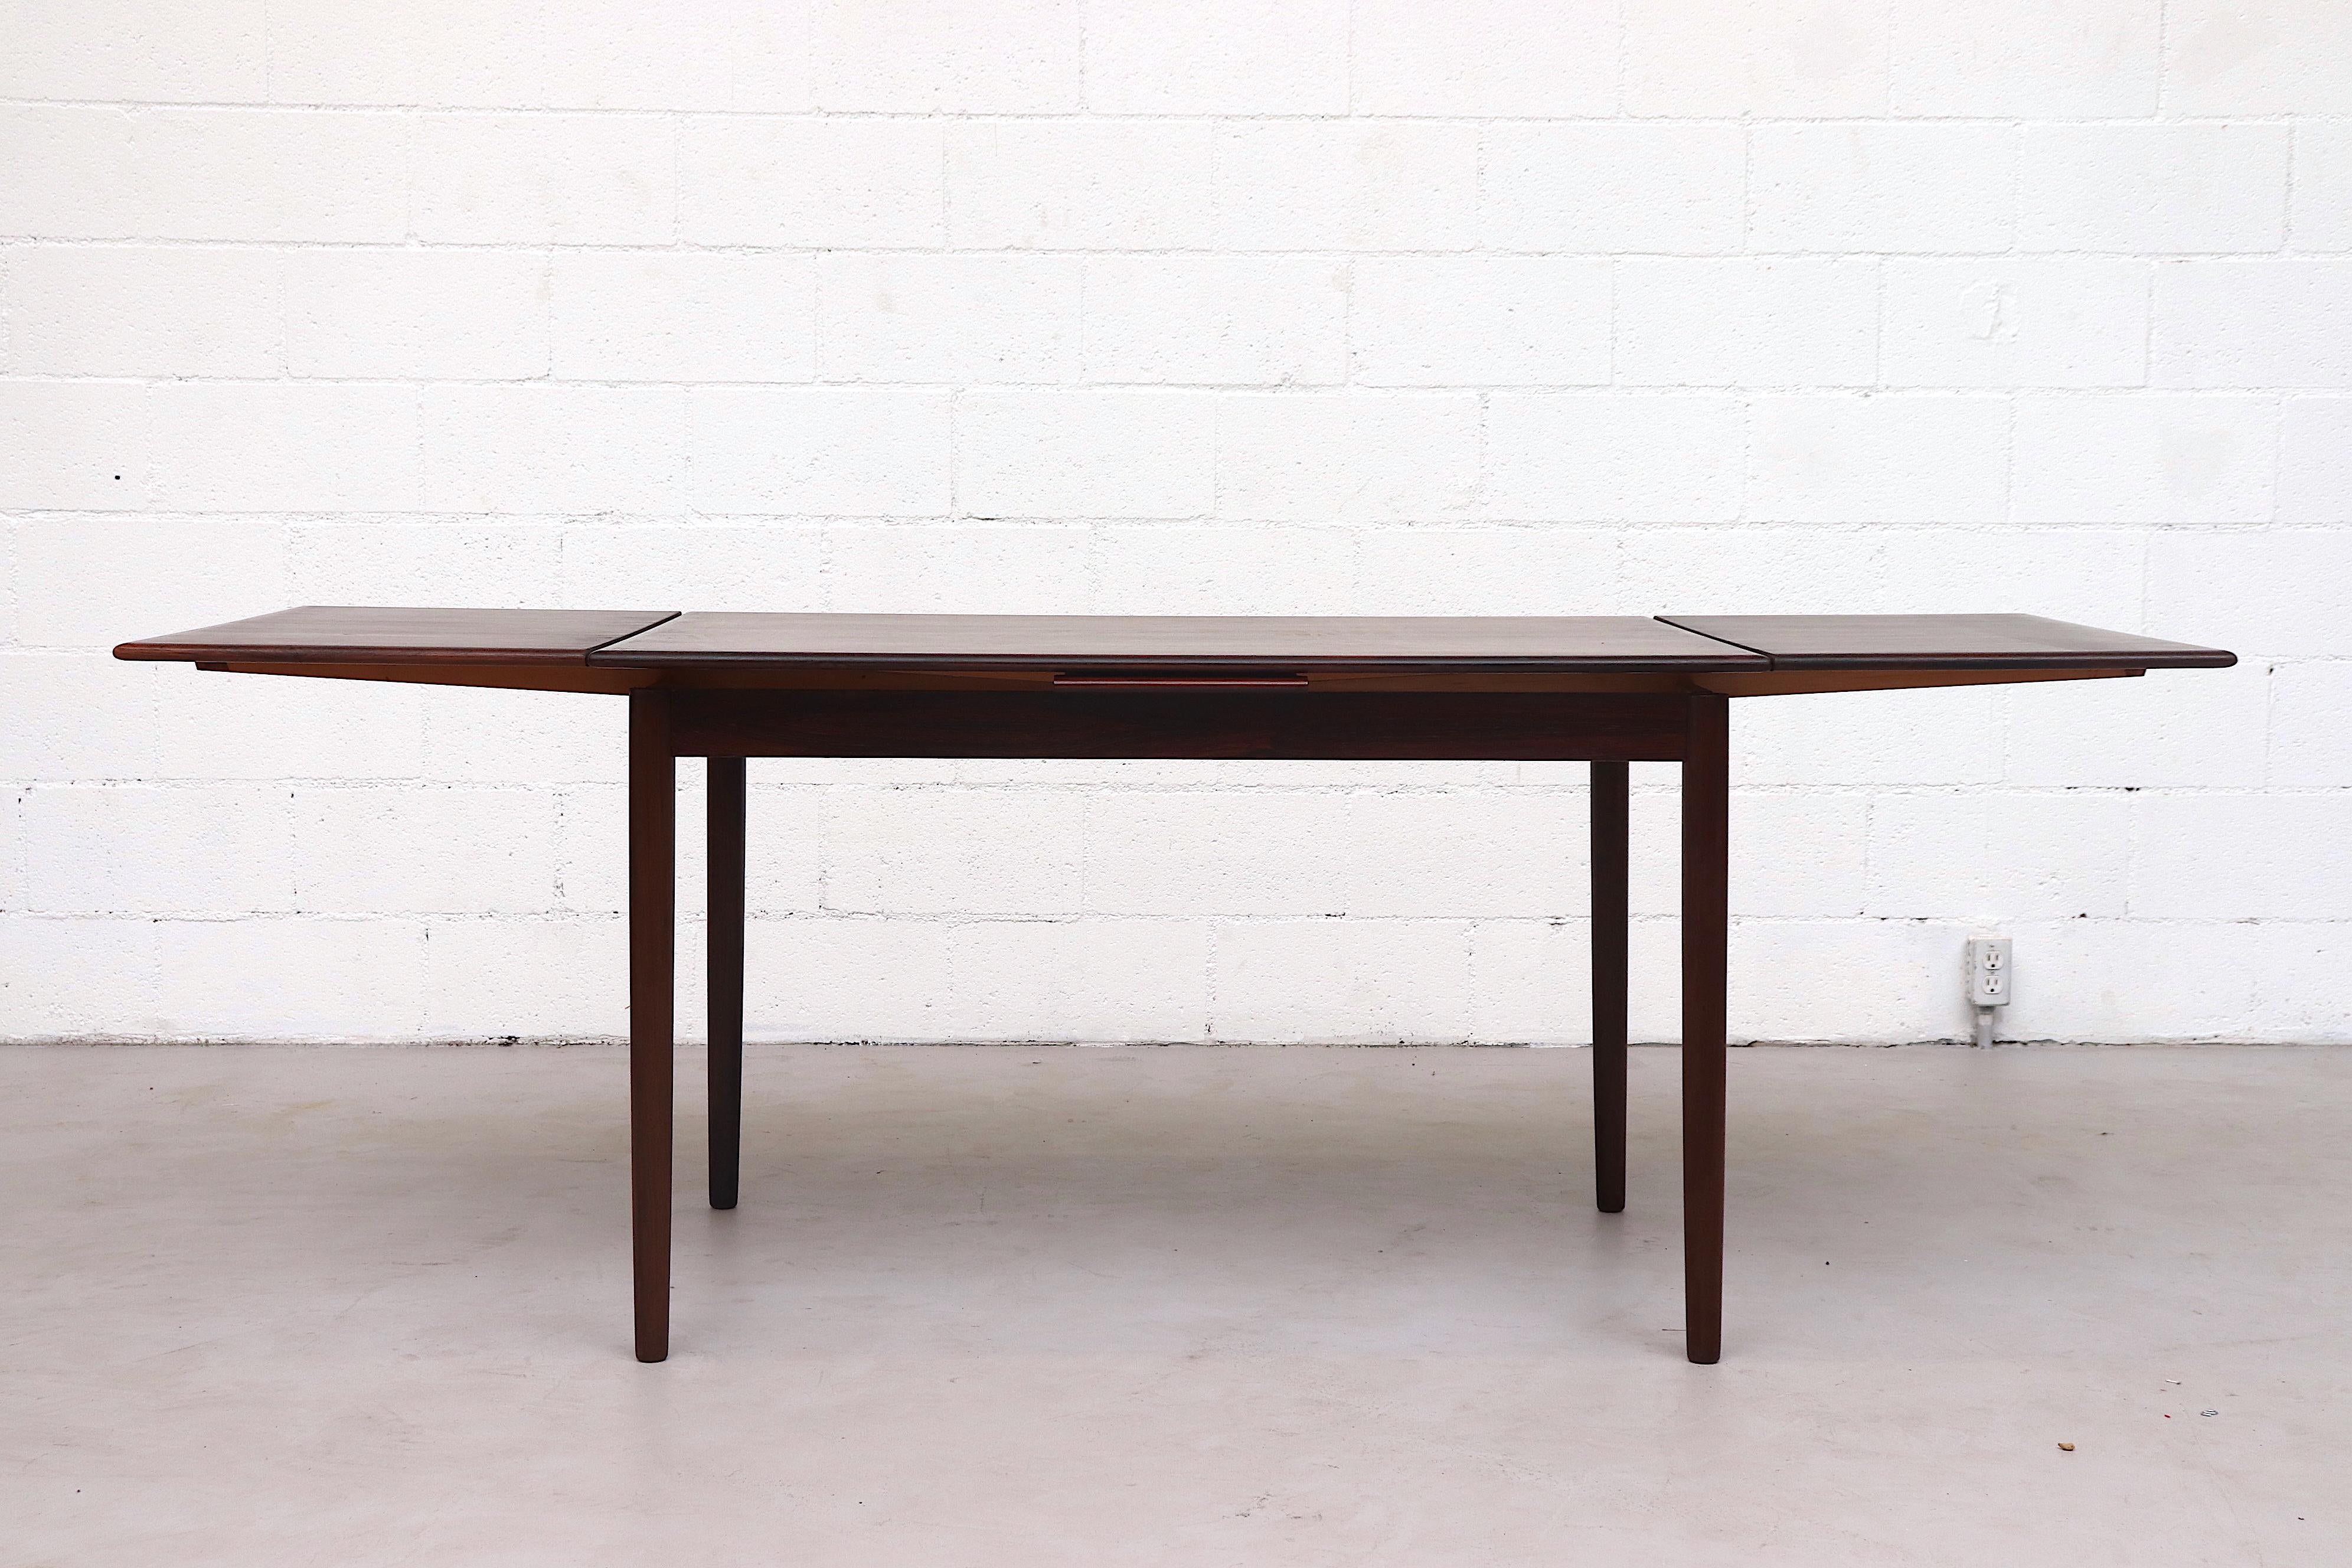 Midcentury Danish Rosewood Dining Table with Leaves 1